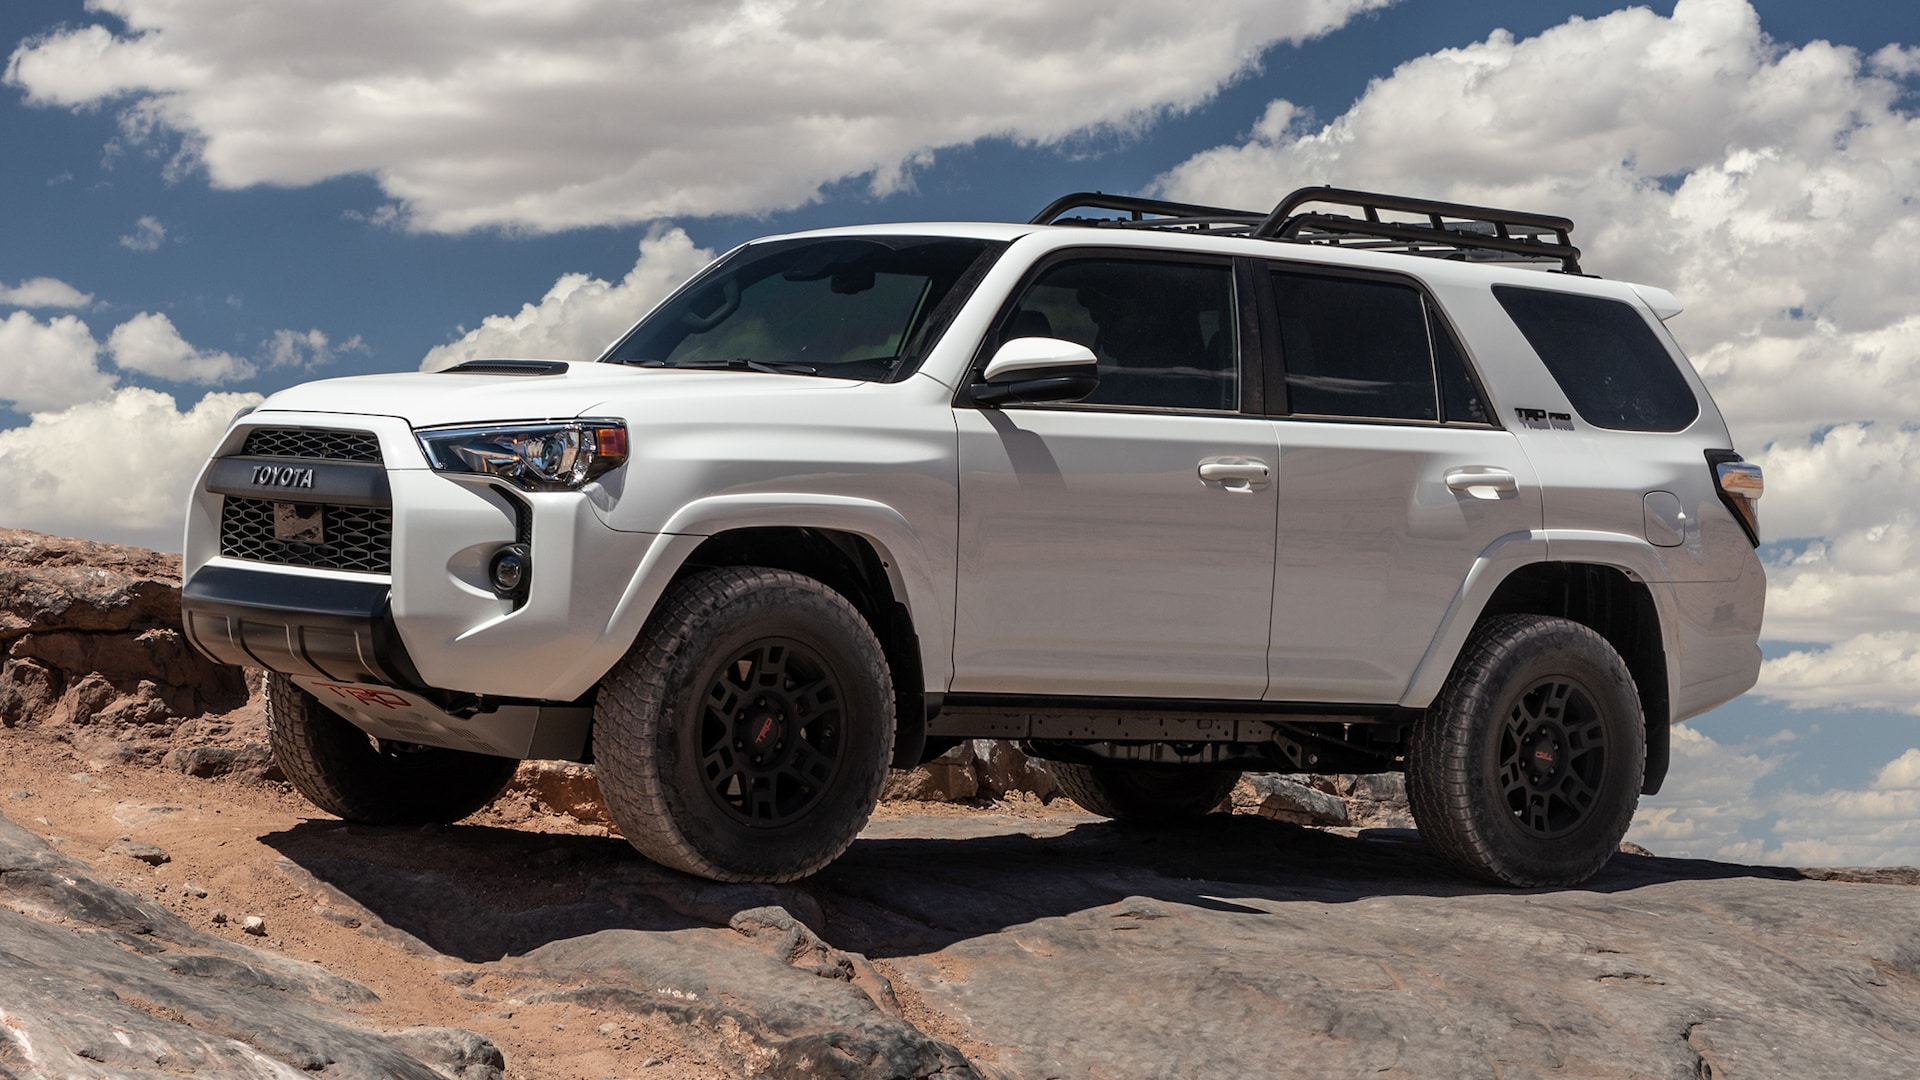 2020 Toyota 4Runner Gets a Price Hike, More Standard Features